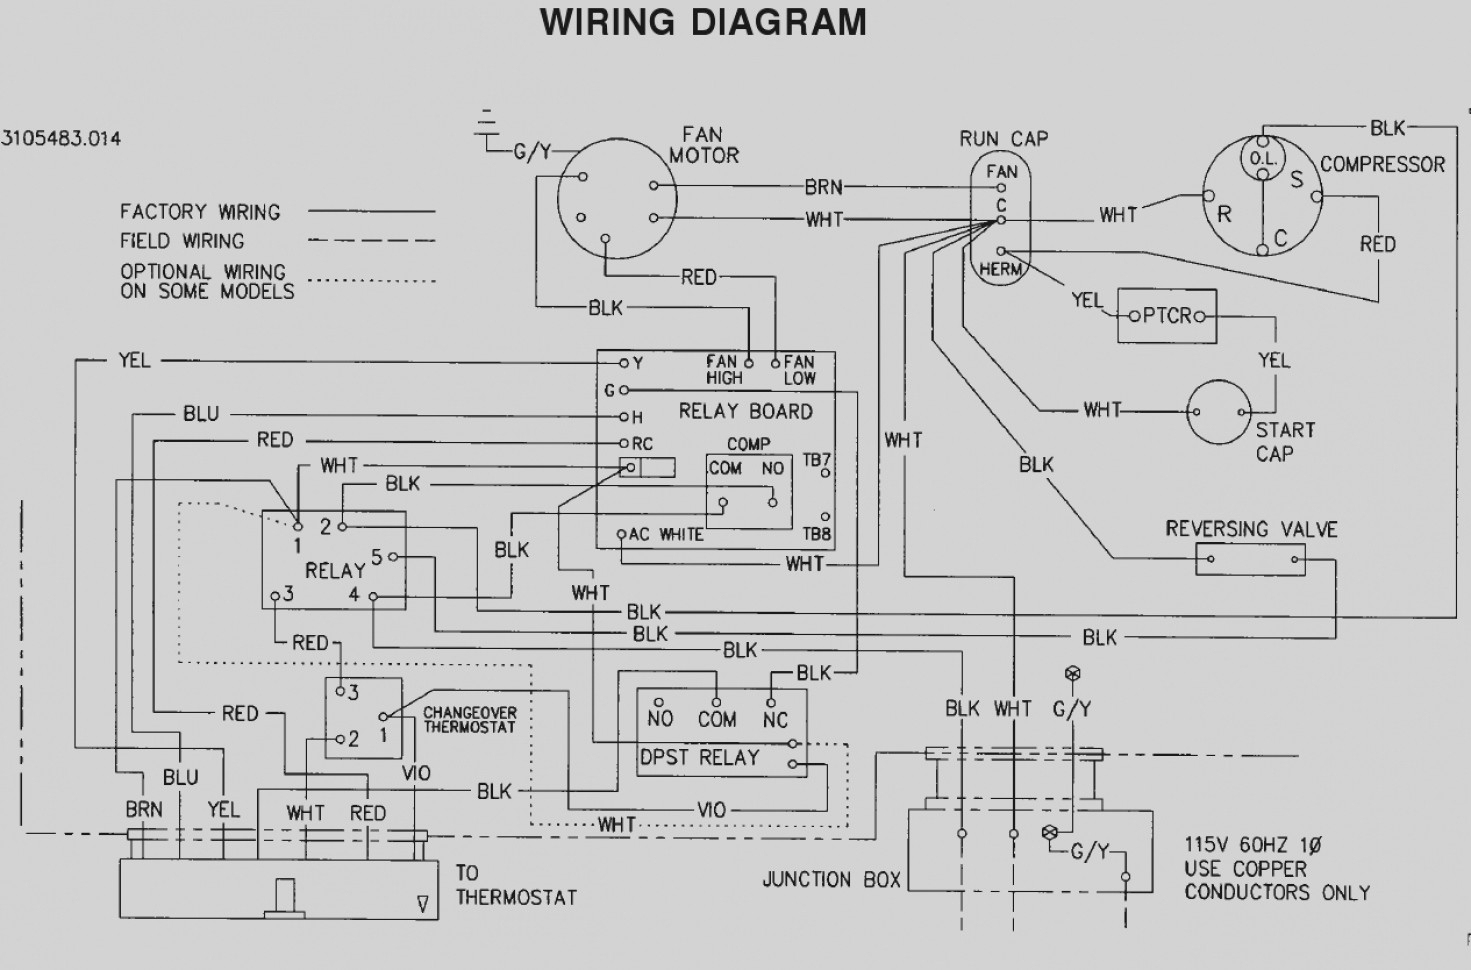 Dometic Single Zone Thermostat Wiring Diagram | Wiring Diagram - Dometic Single Zone Lcd Thermostat Wiring Diagram